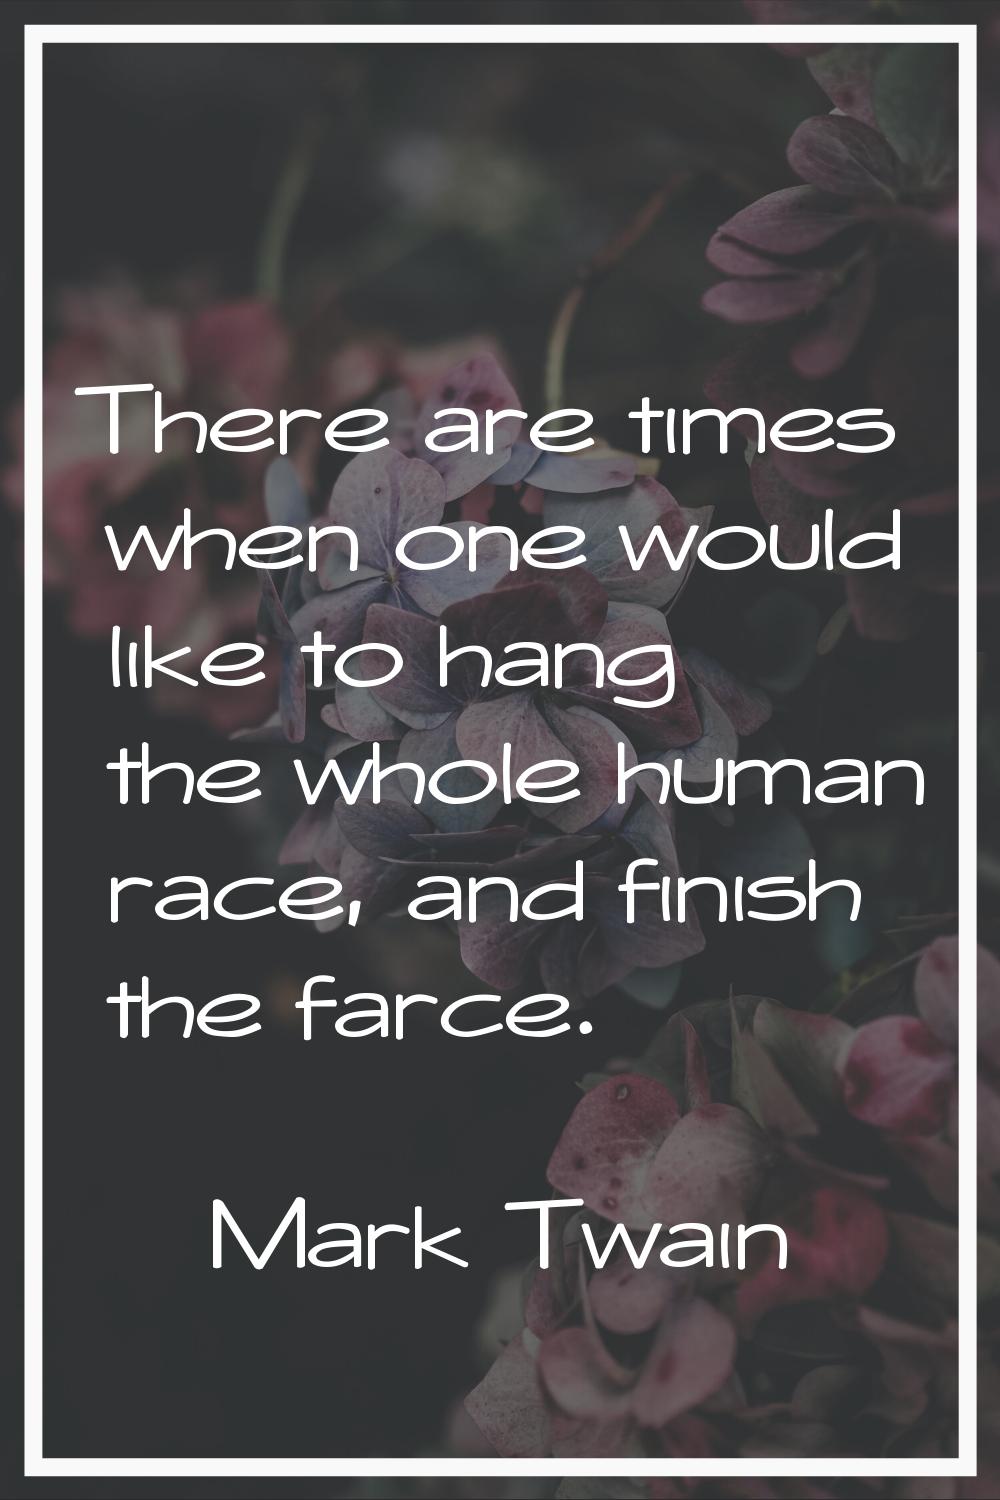 There are times when one would like to hang the whole human race, and finish the farce.